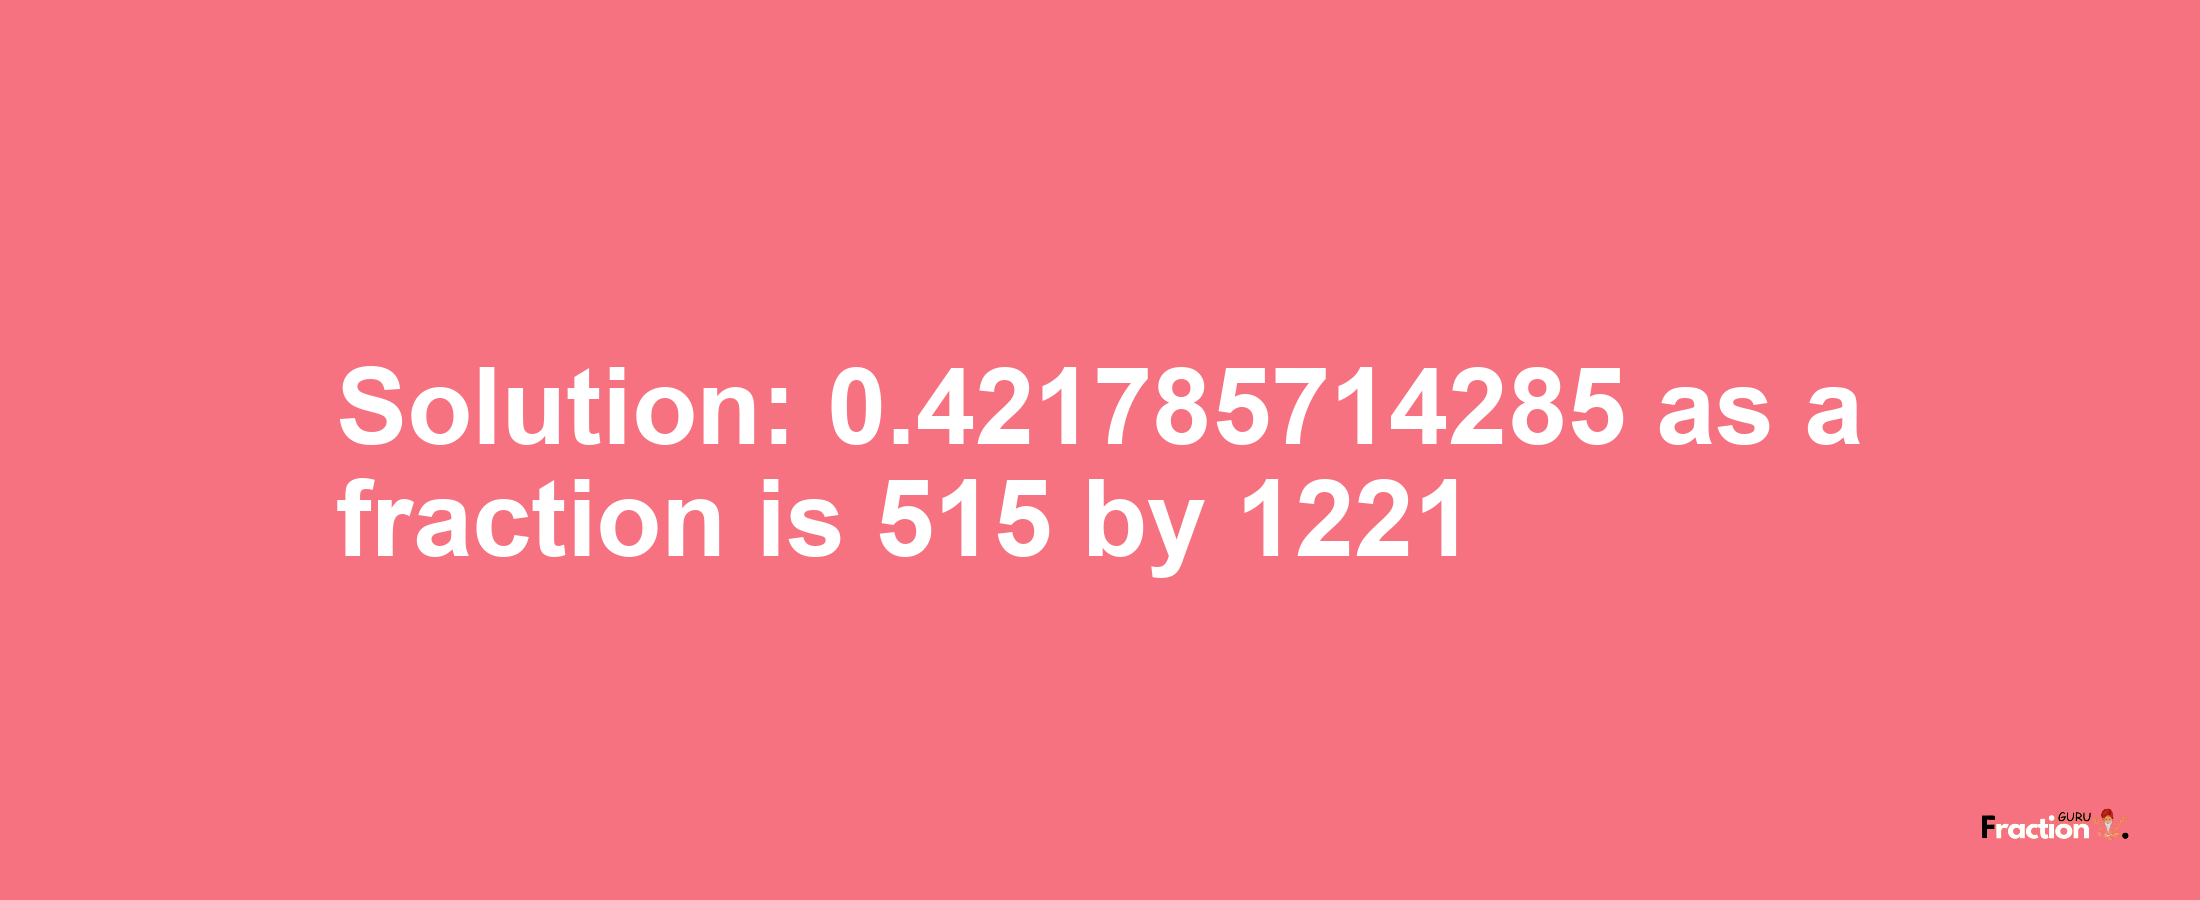 Solution:0.421785714285 as a fraction is 515/1221